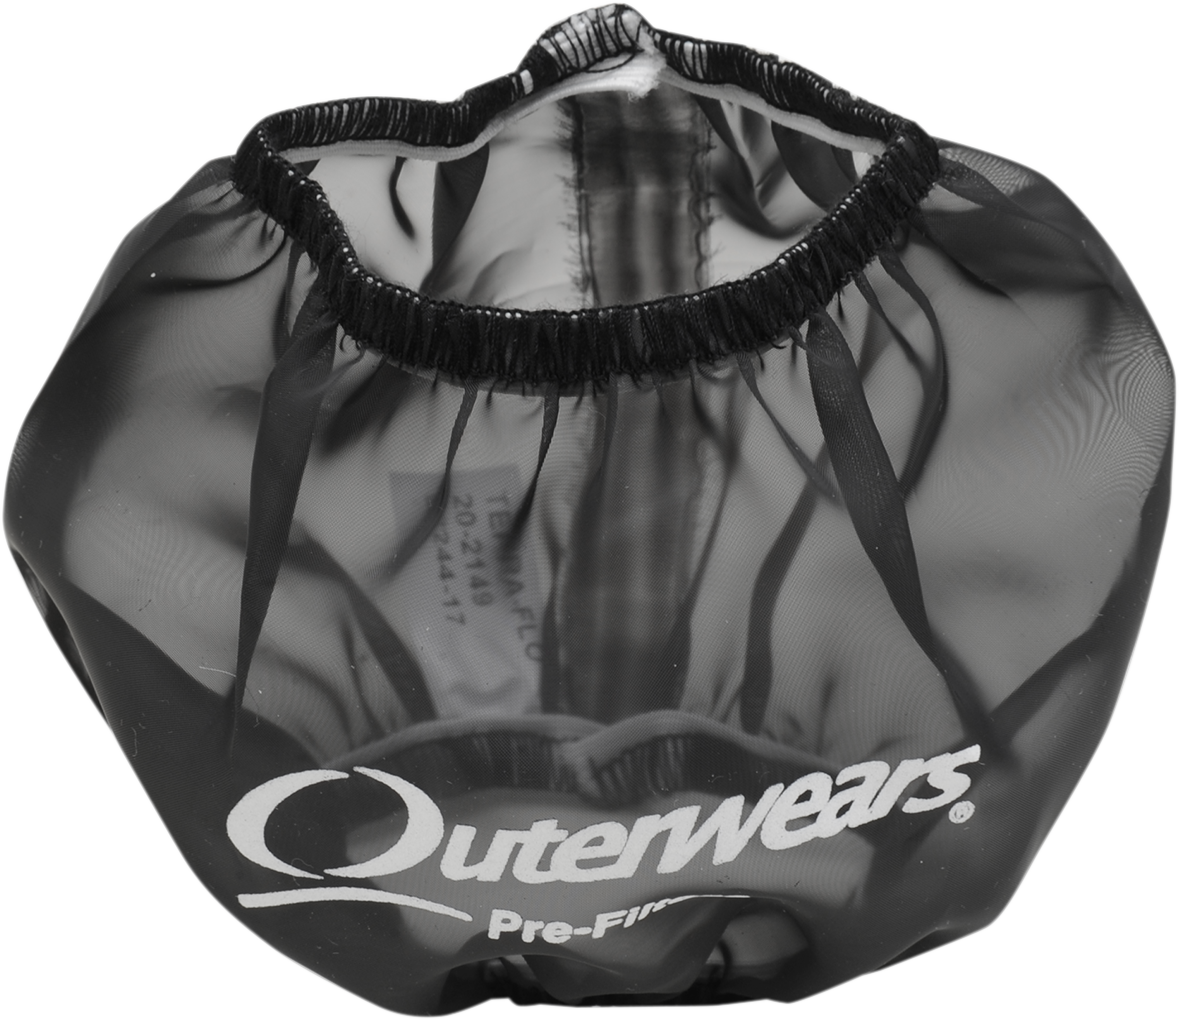 OUTERWEARS Water Repellent Pre-Filter - Black 20-2353-01